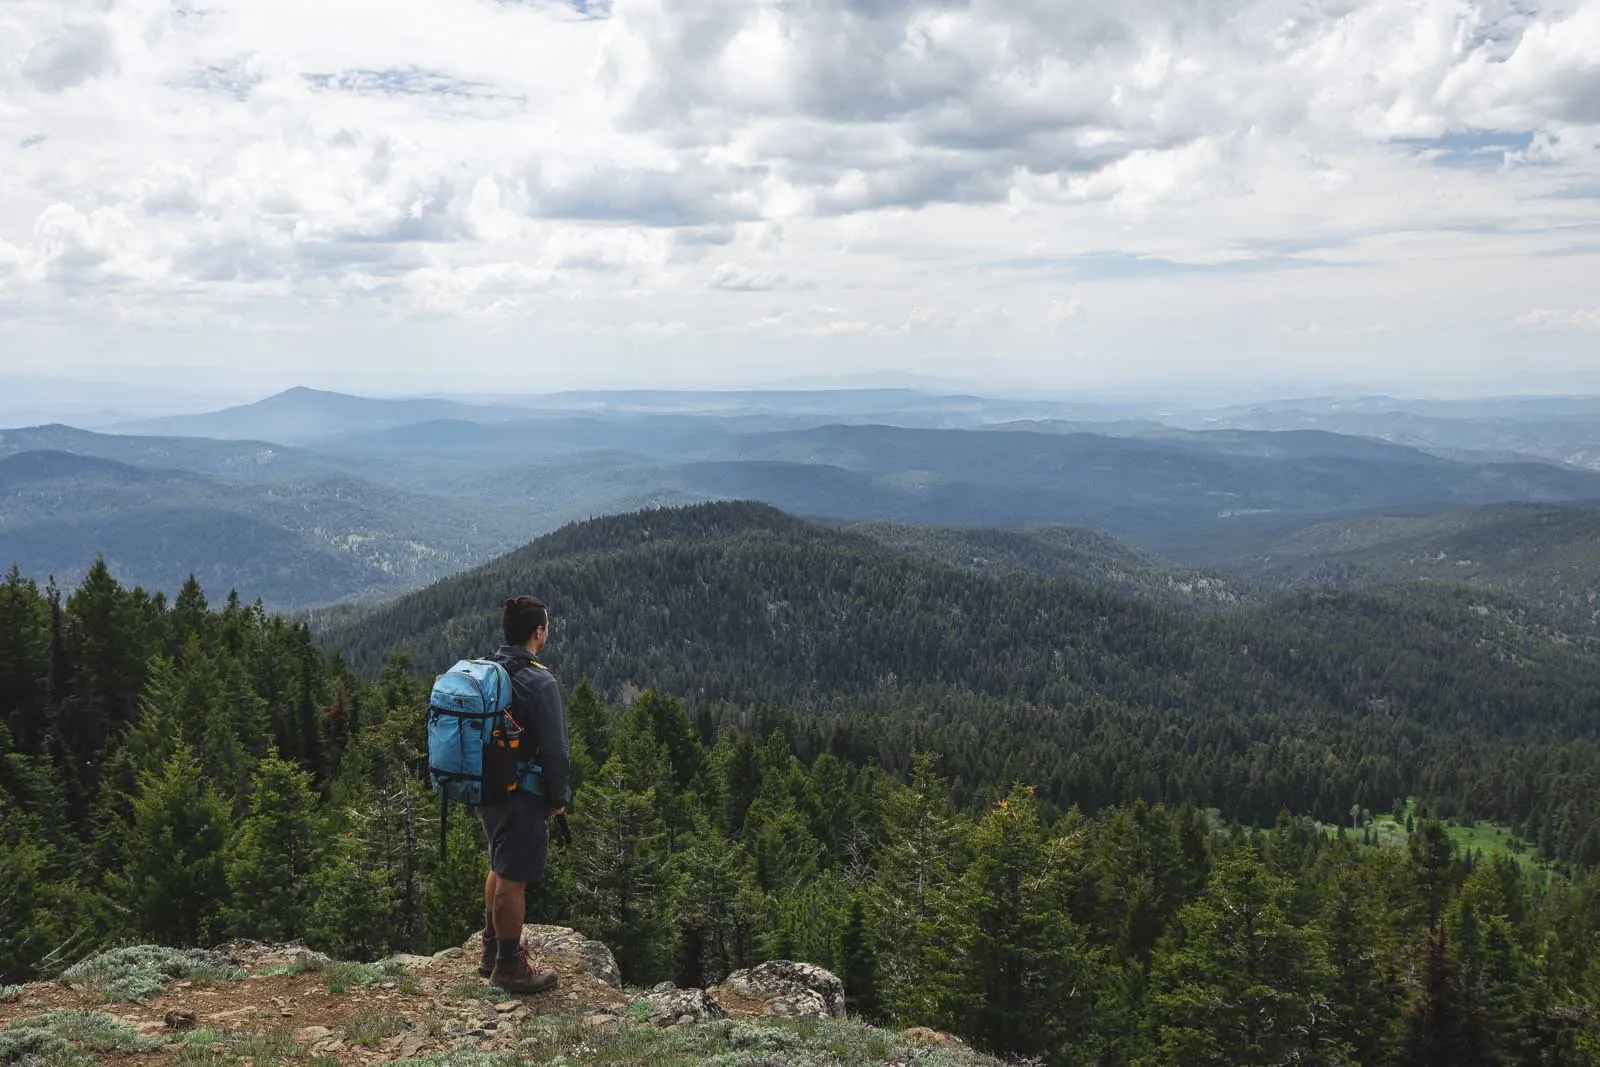 A fun hike in Ochoco National Forest is Lookout Mountain trail.